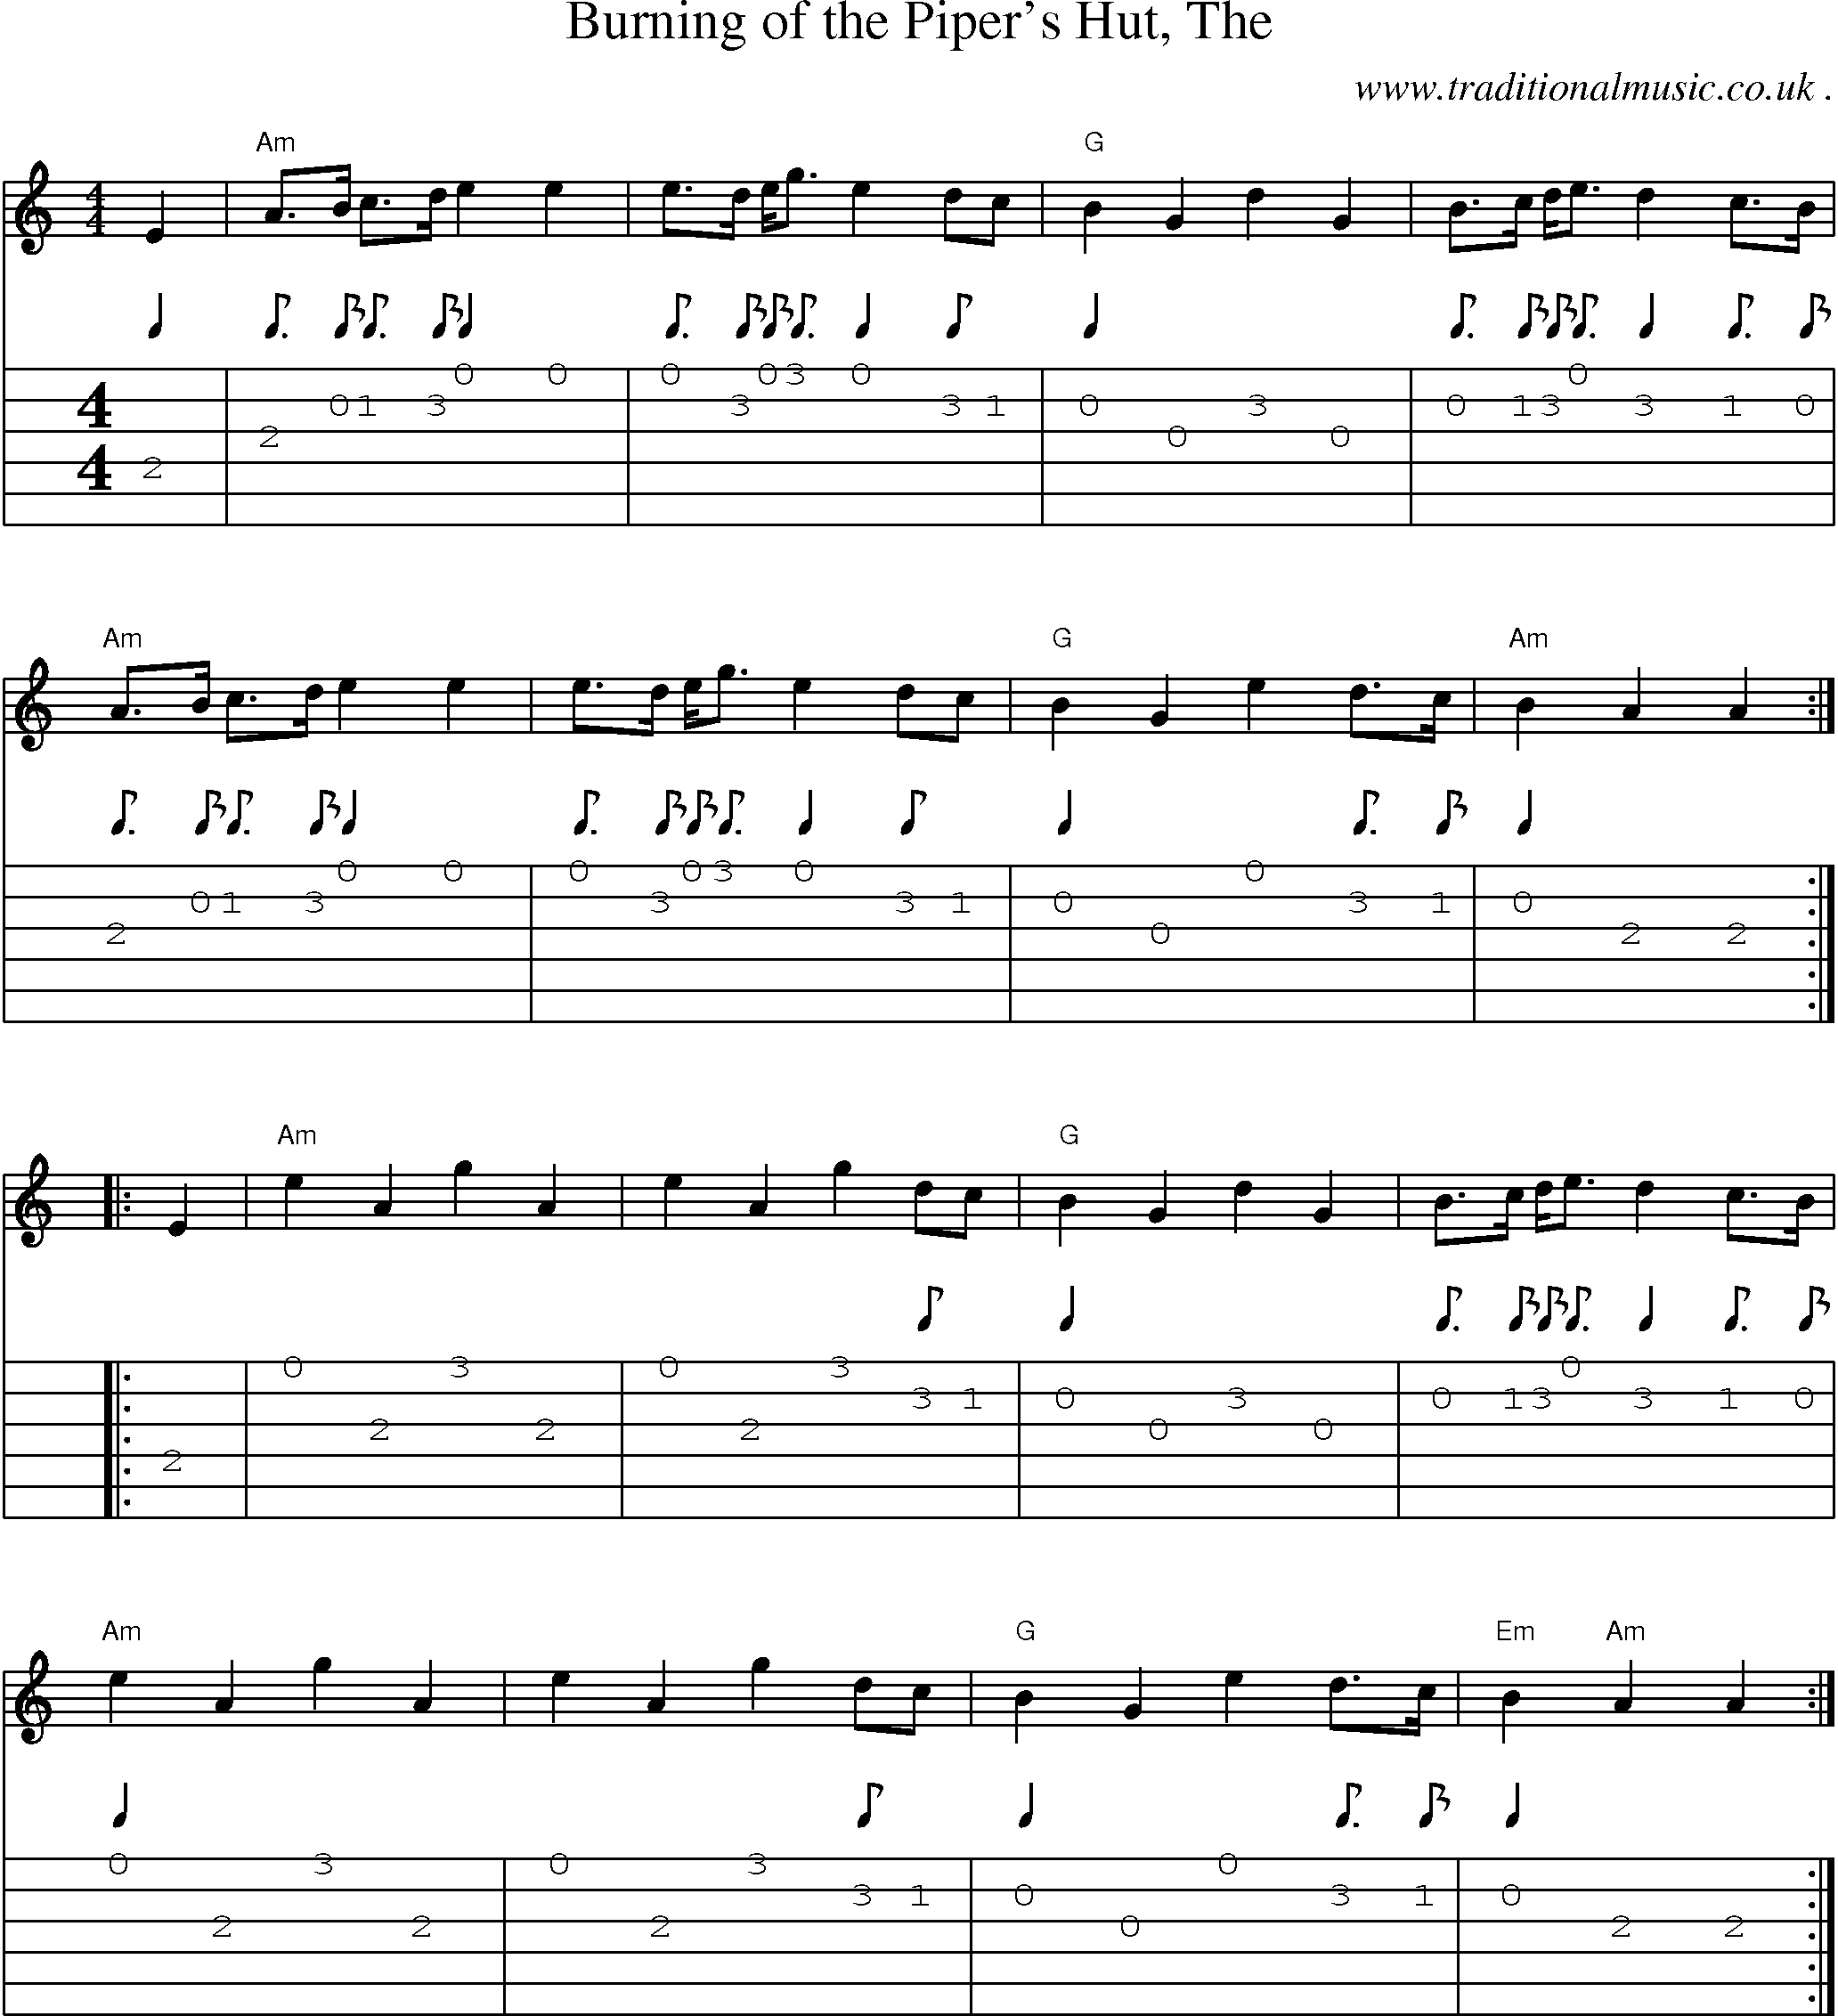 Music Score and Guitar Tabs for Burning of the Pipers Hut The